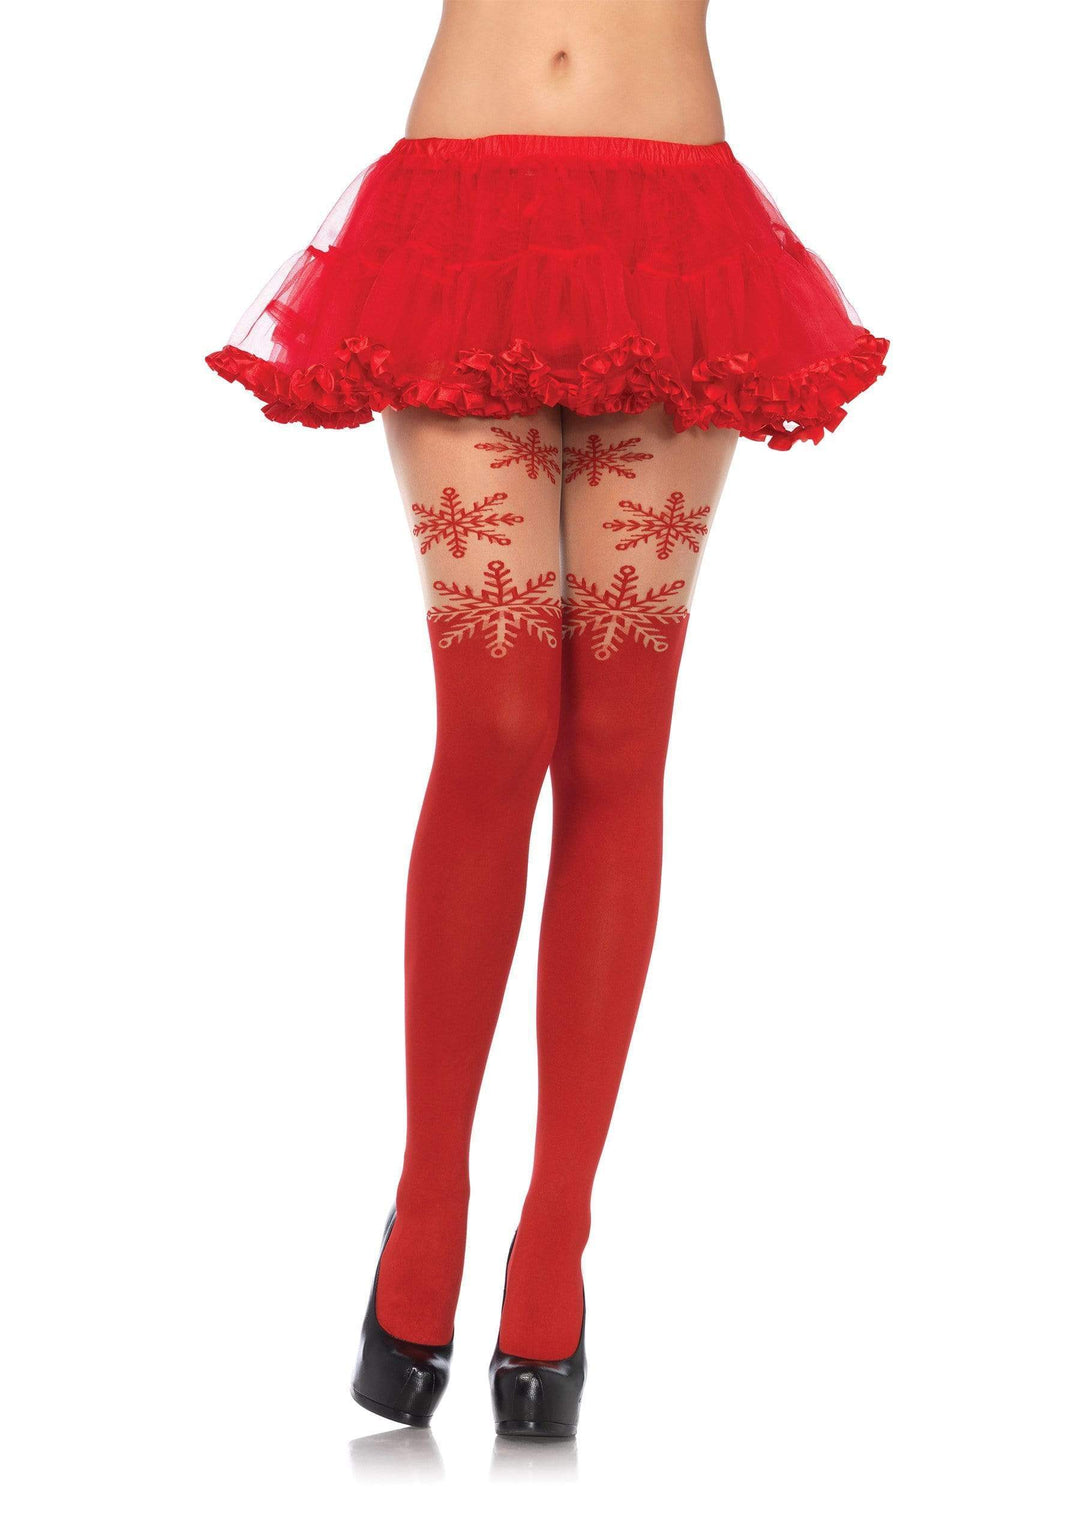 Red Opaque Pantyhose with Snowflake Thigh Accent